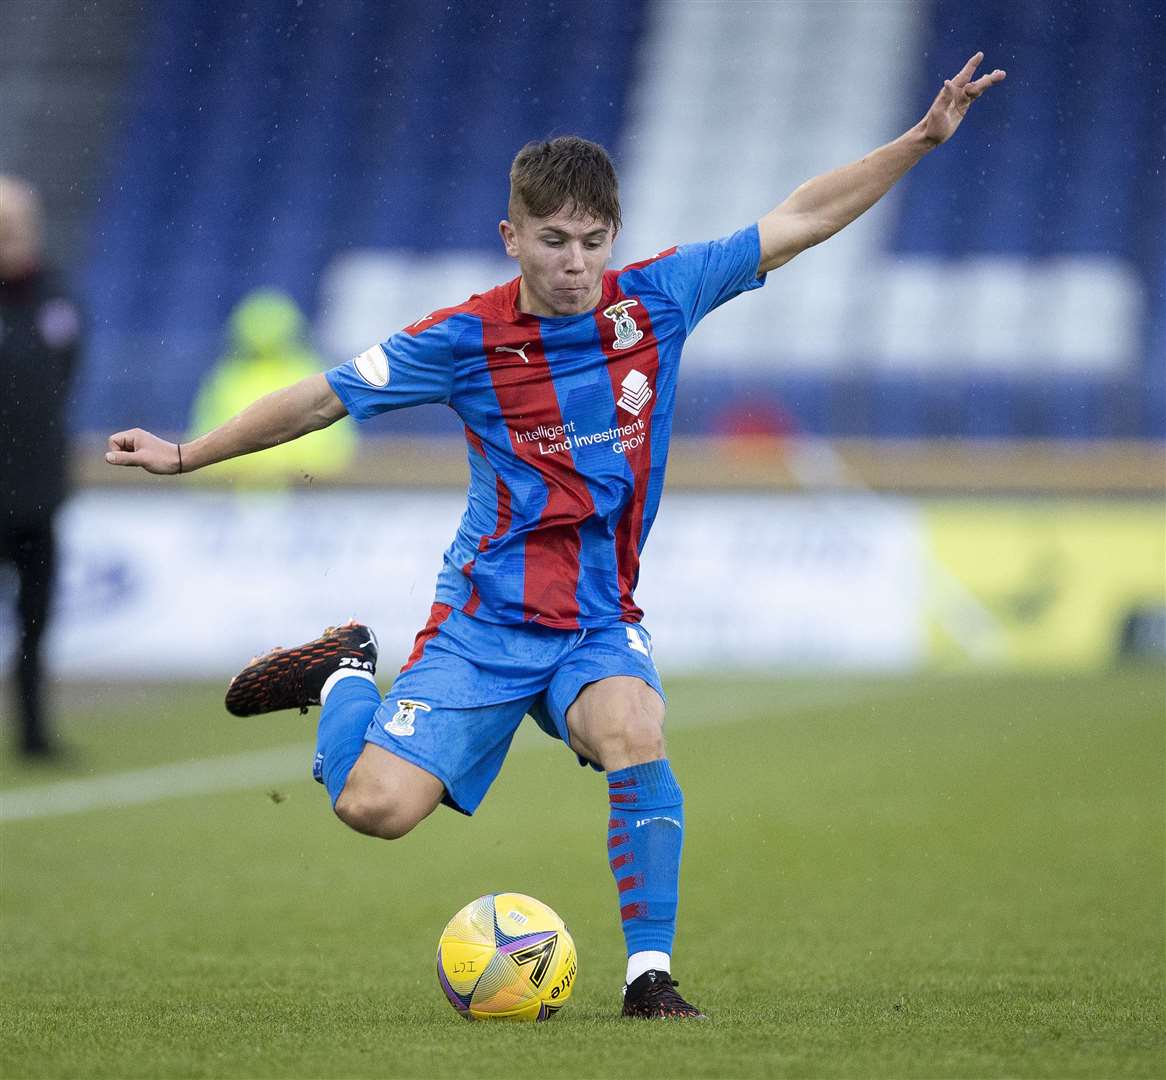 Rangers winger Kai Kennedy has impressed since joining Caley Thistle on loan.